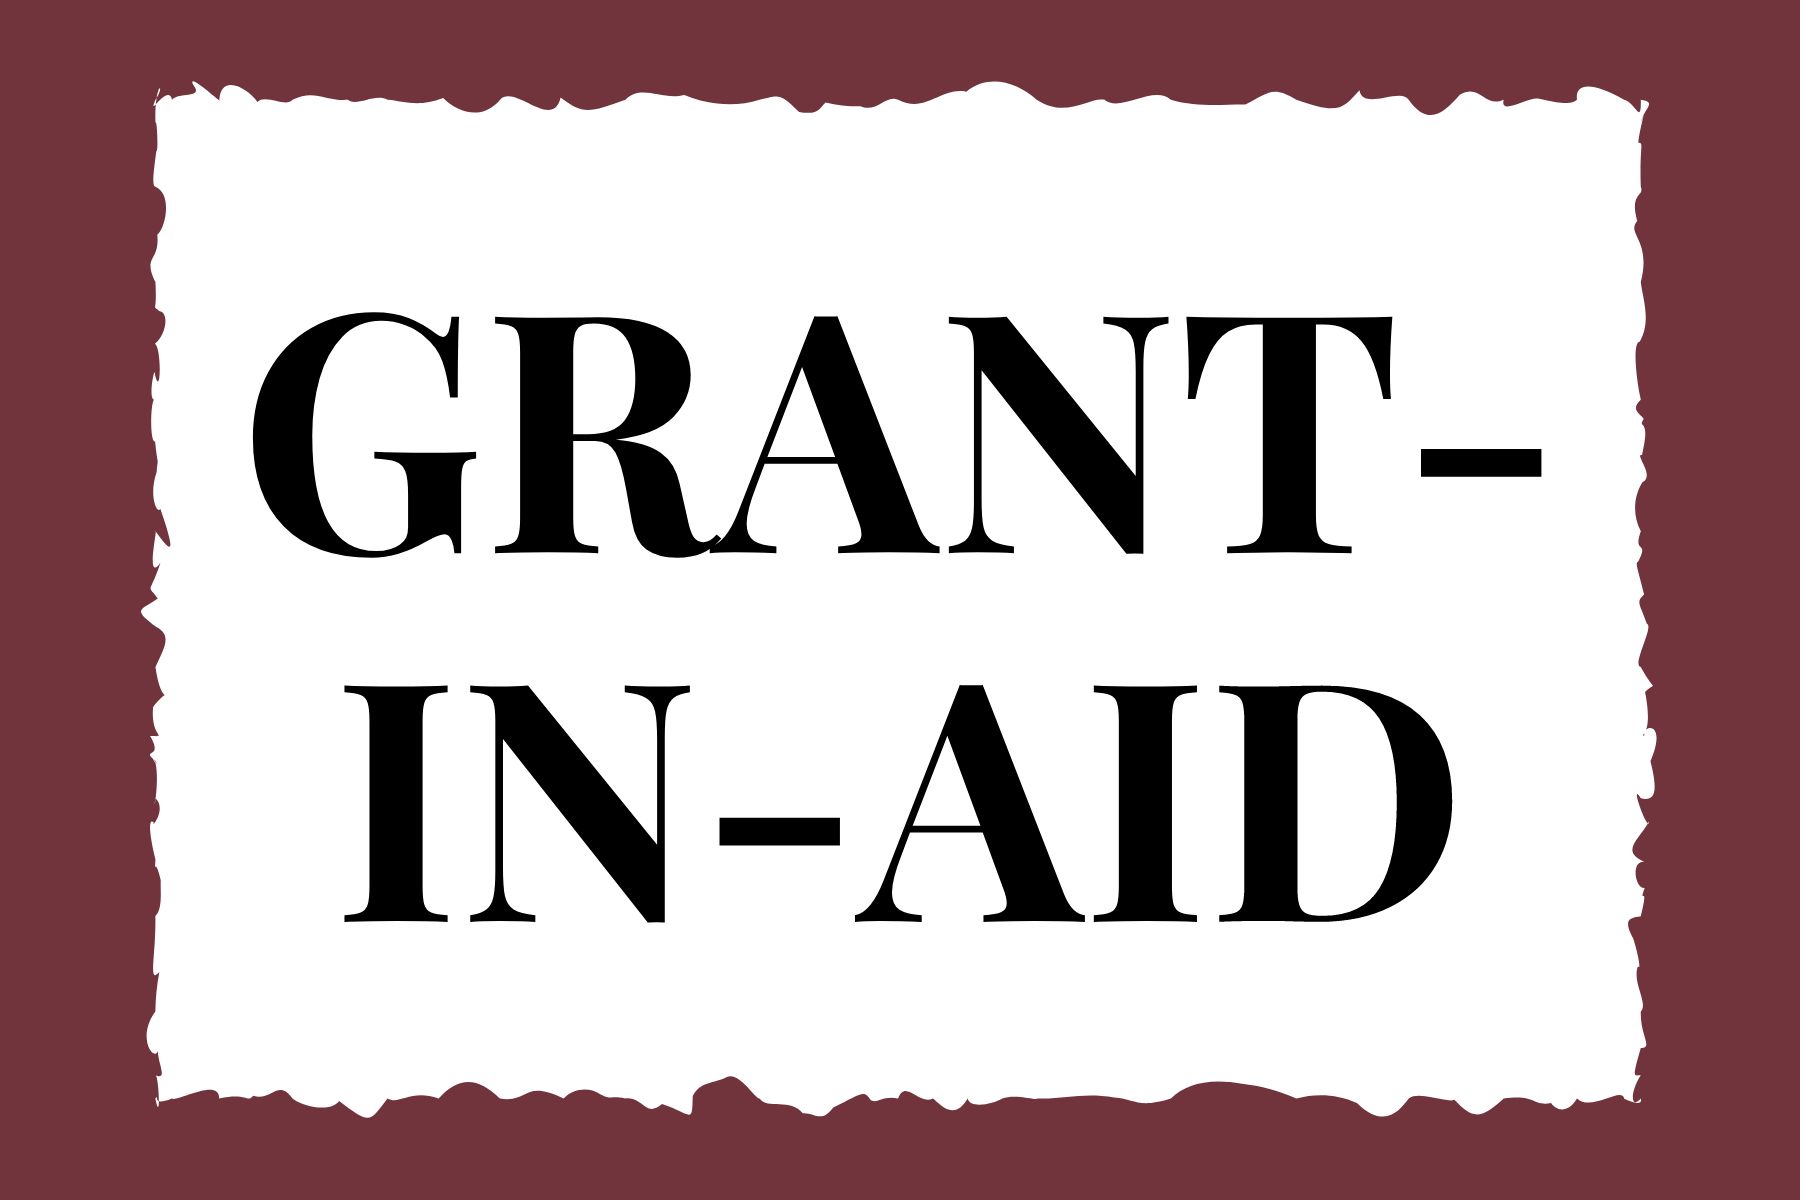 grant-in-aid